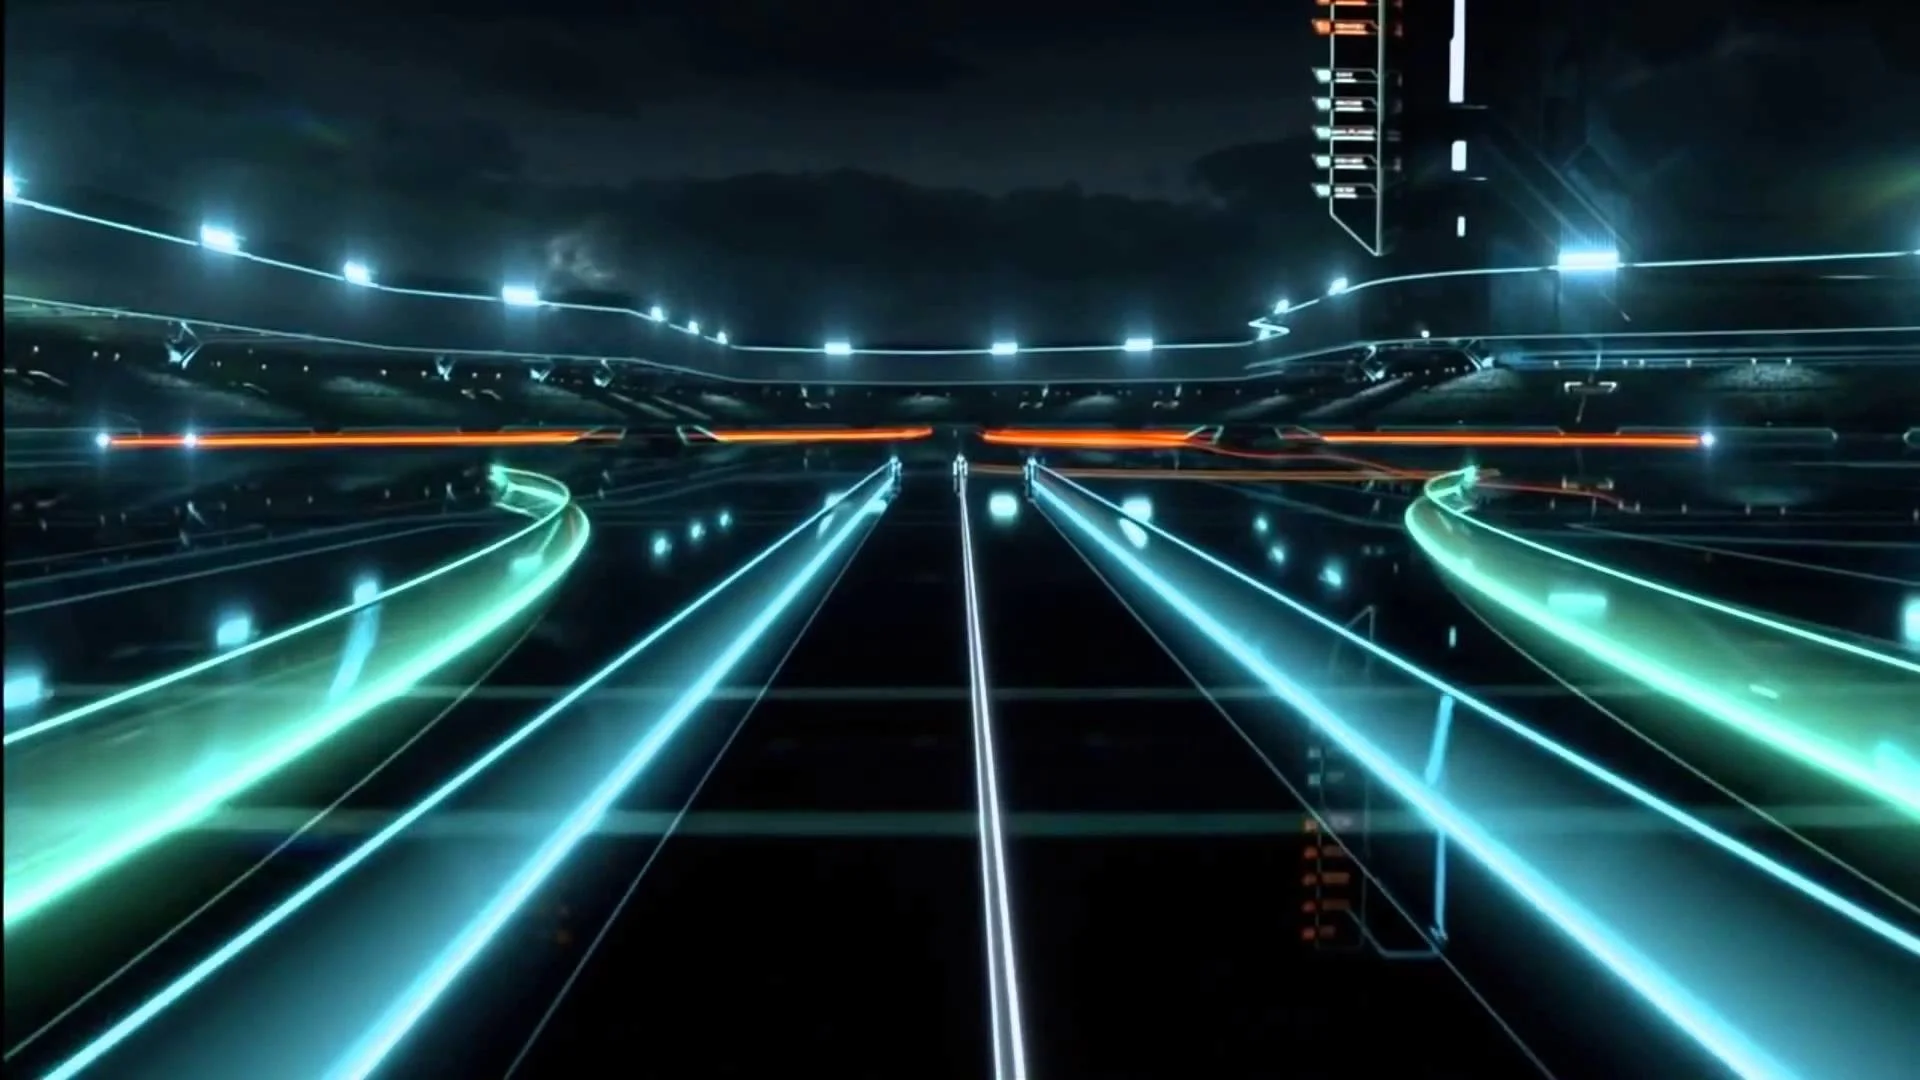 Tron Light Cycle Scene clips Background Music by Avicii Remix